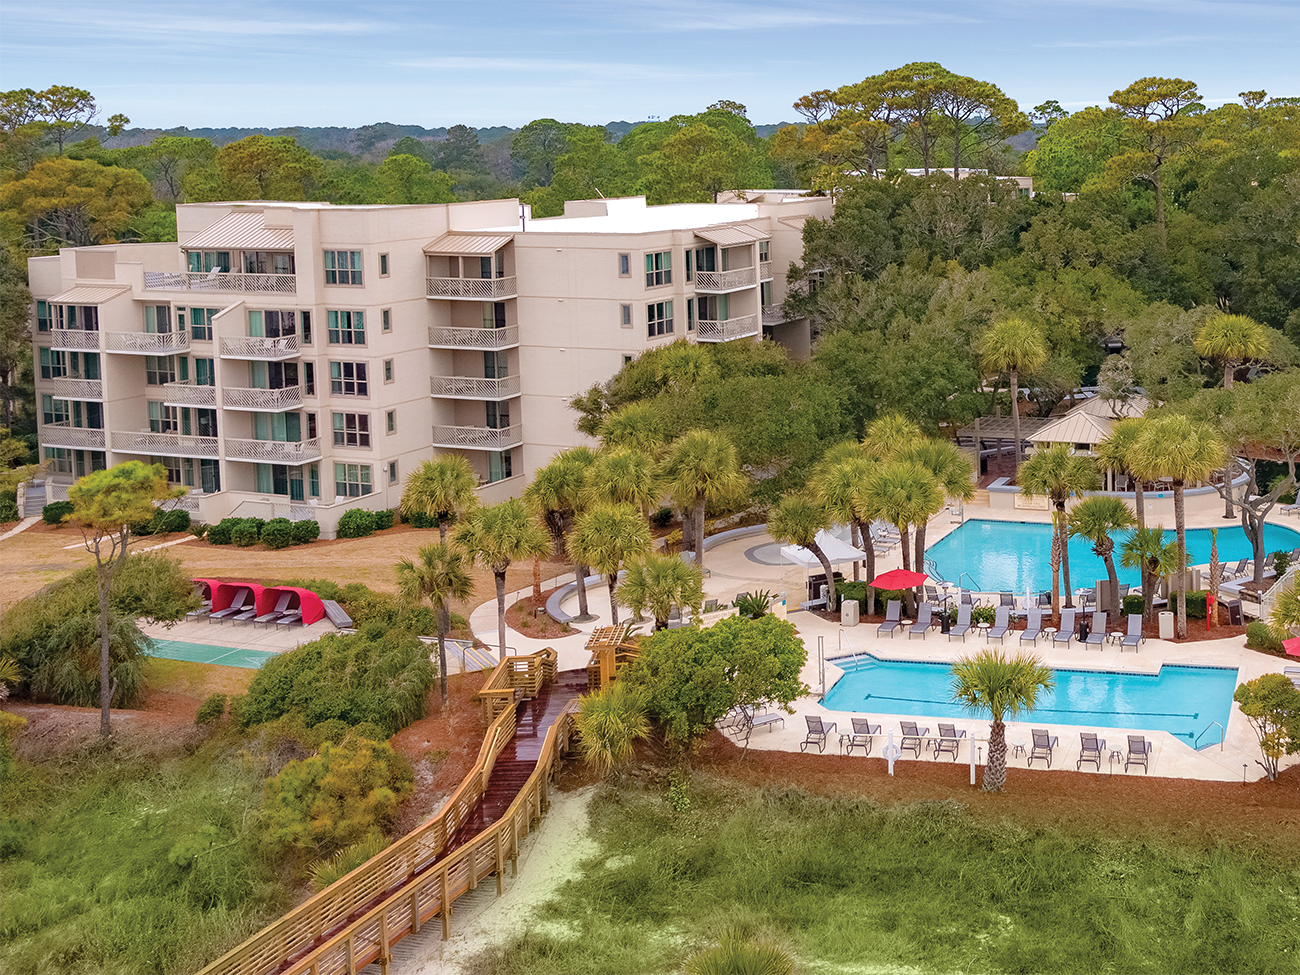 Marriott's Monarch Resort View. Marriott's Monarch is located in Hilton Head Island, South Carolina United States.